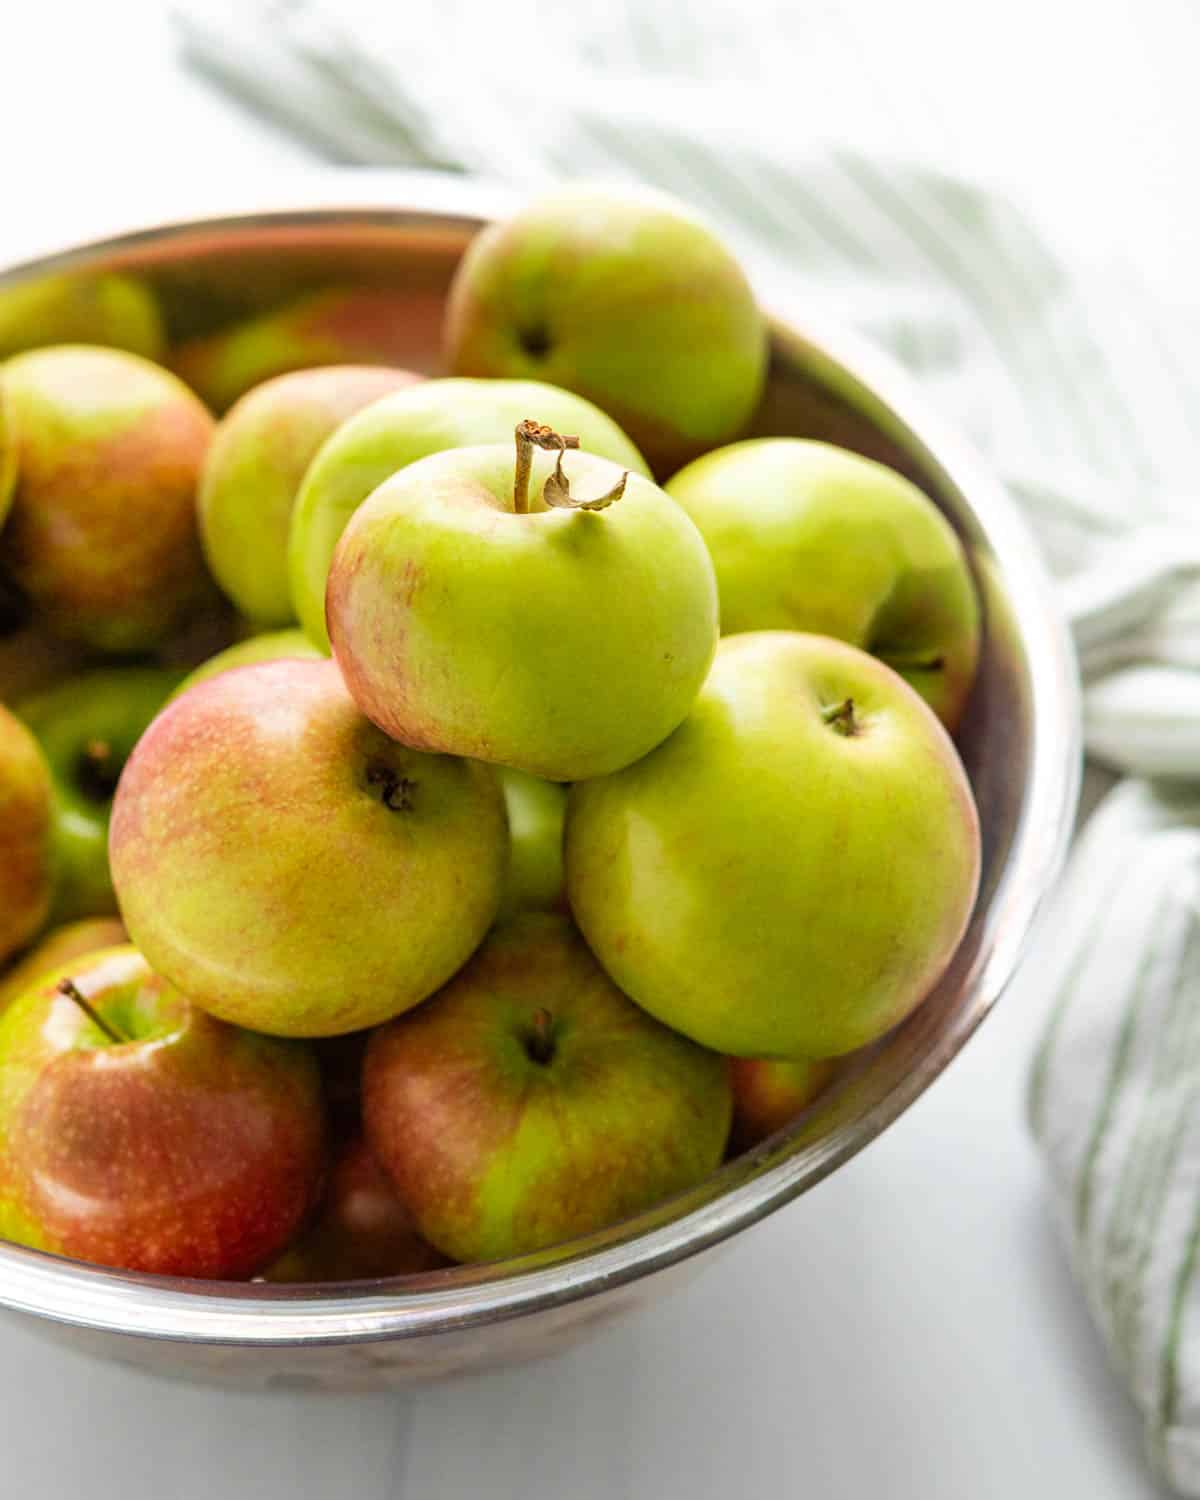 A large bowl of McIntosh apples.